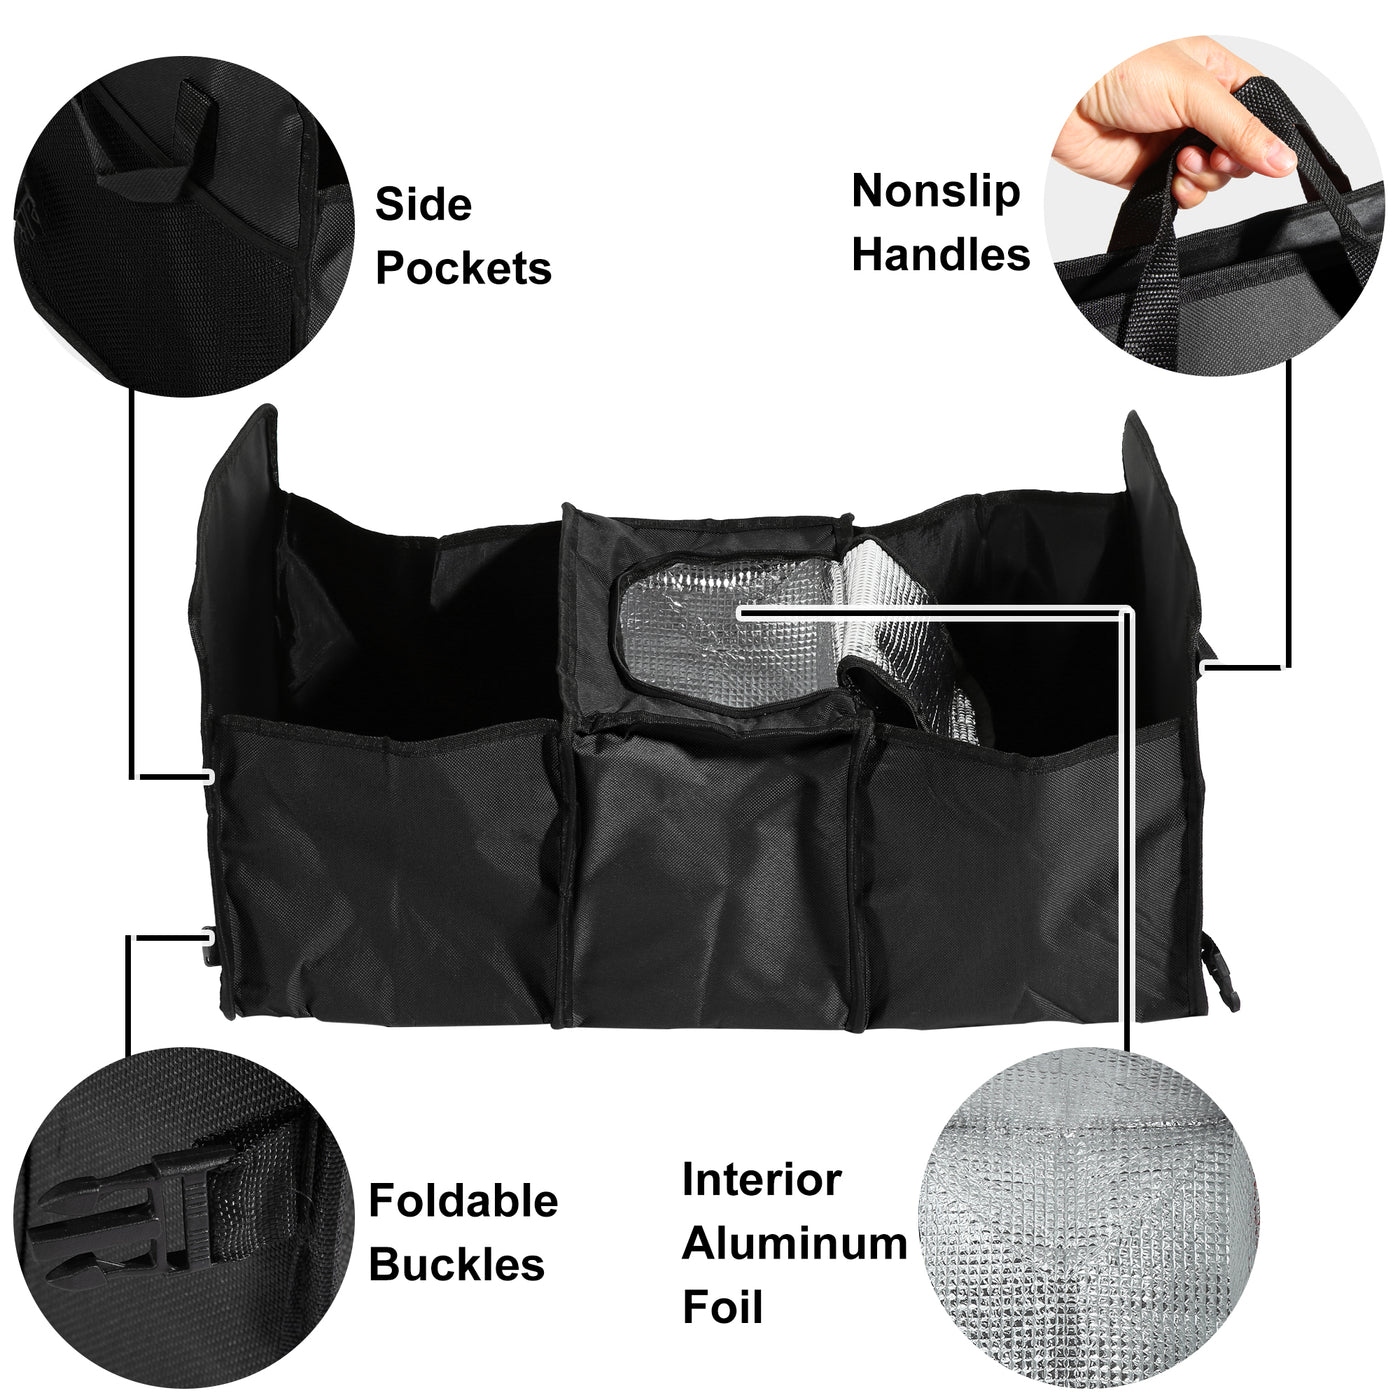 X AUTOHAUX Car Trunk Foldable Organizer Mesh Storage Pockets Thermal Insulation Cold Preservation with Aluminum Foil Multi Compartments Cooling Bag Black